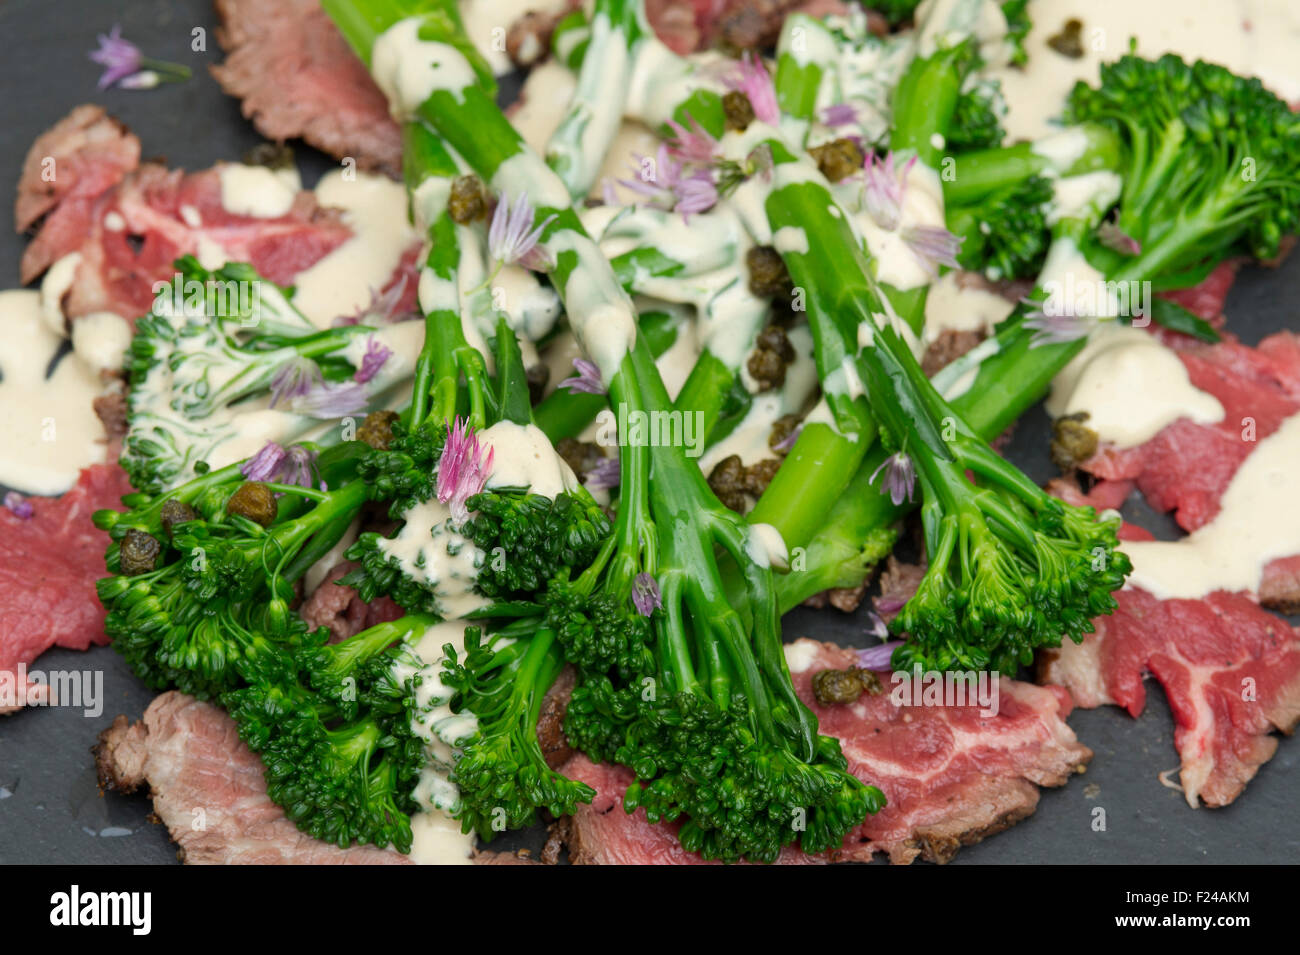 Paleo diet food, beef tonnato with broccoli, supposedly based on 'cave man' Palaeolithic foods for health. a UK Stock Photo